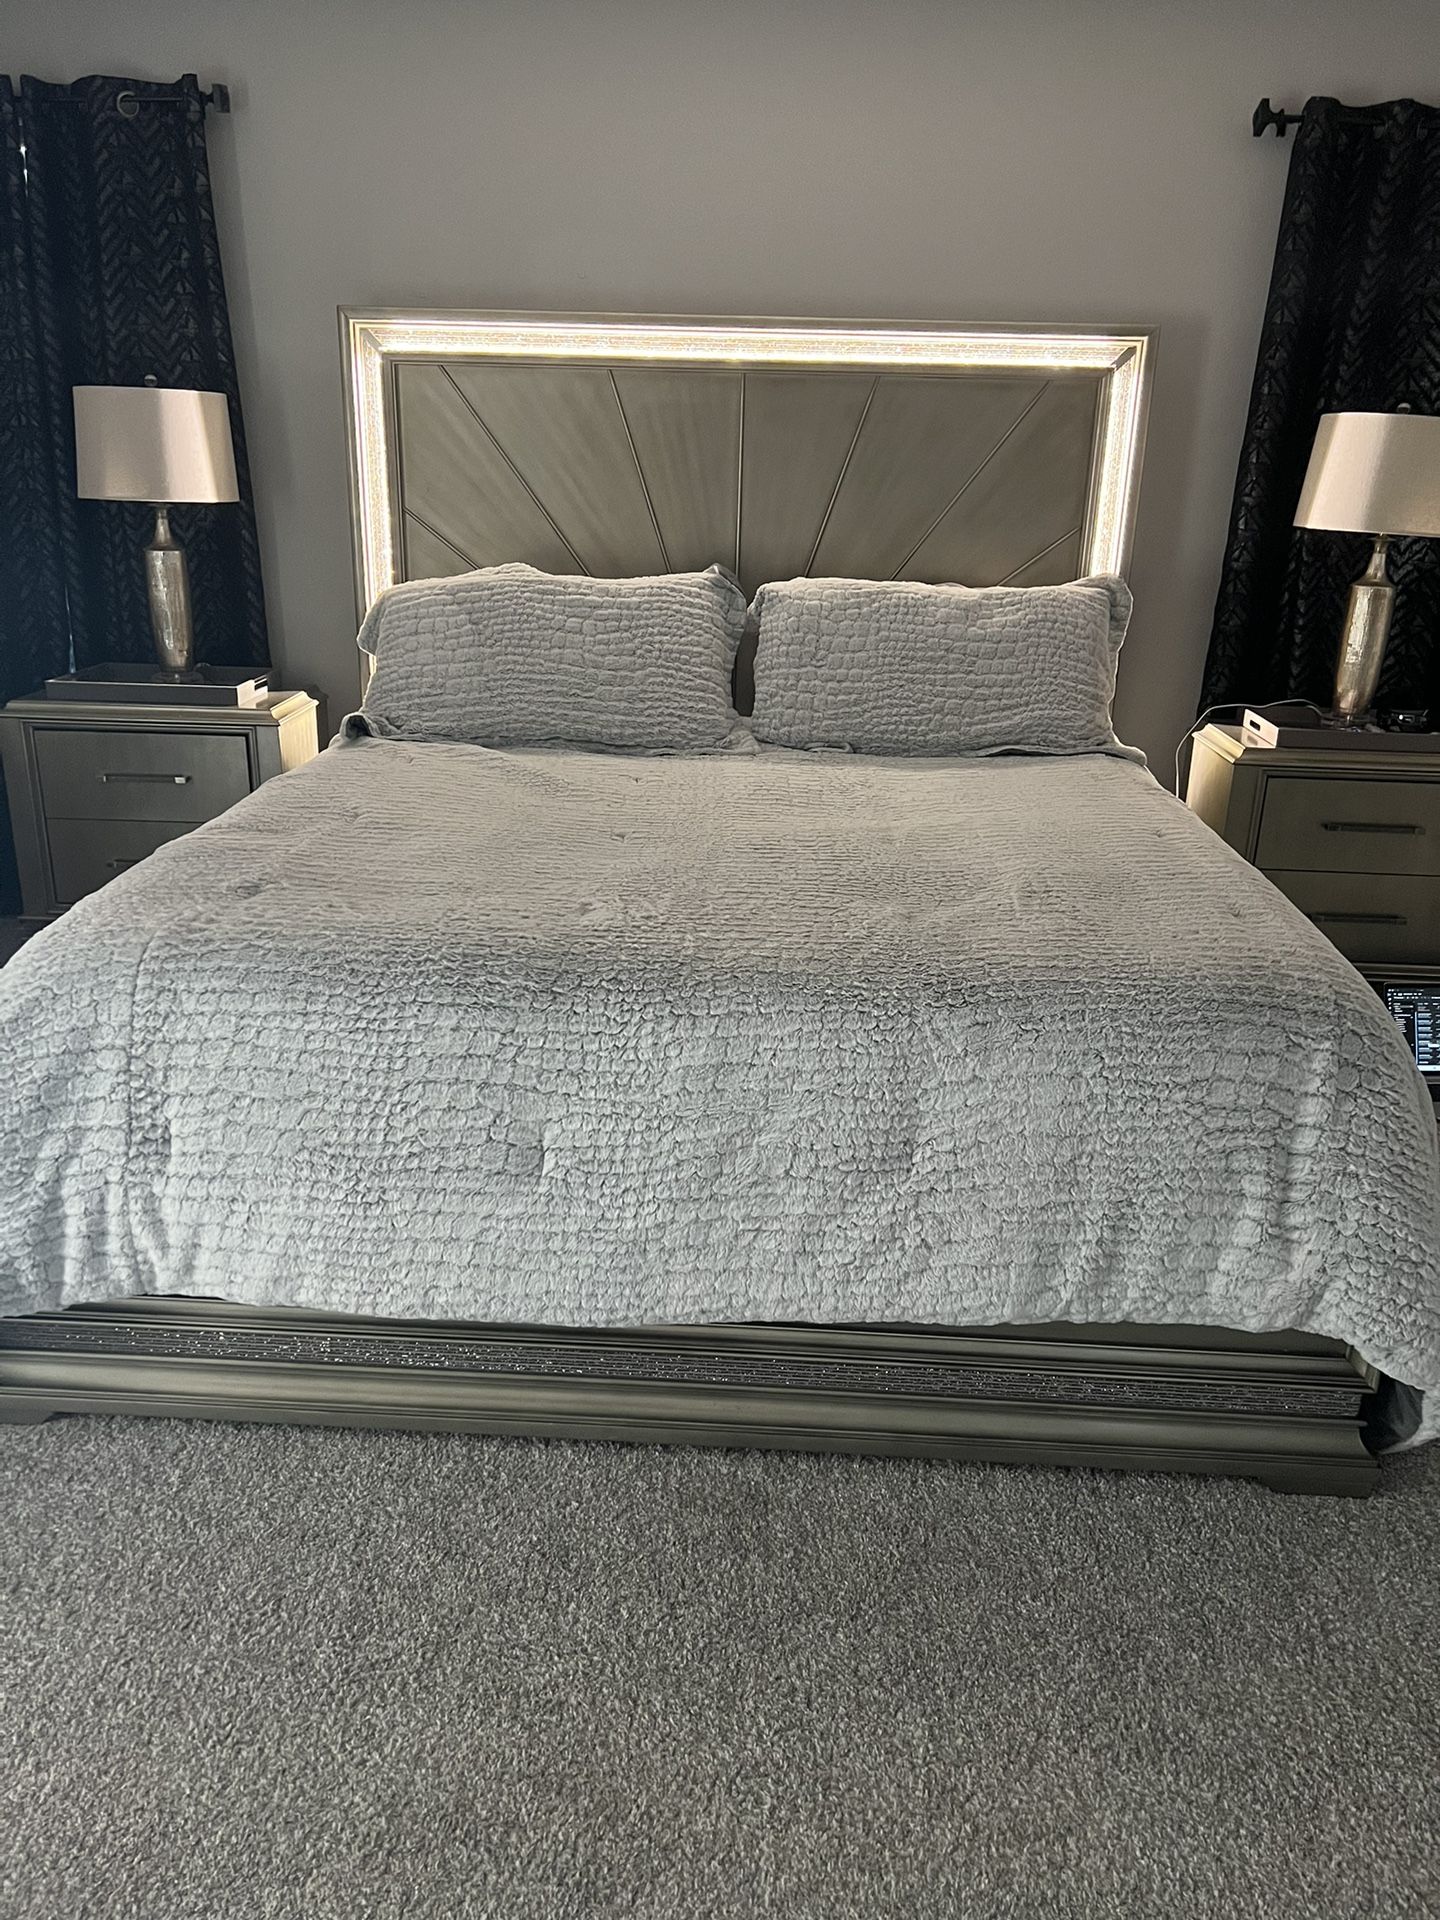 King Size Bed Set With LEDs 